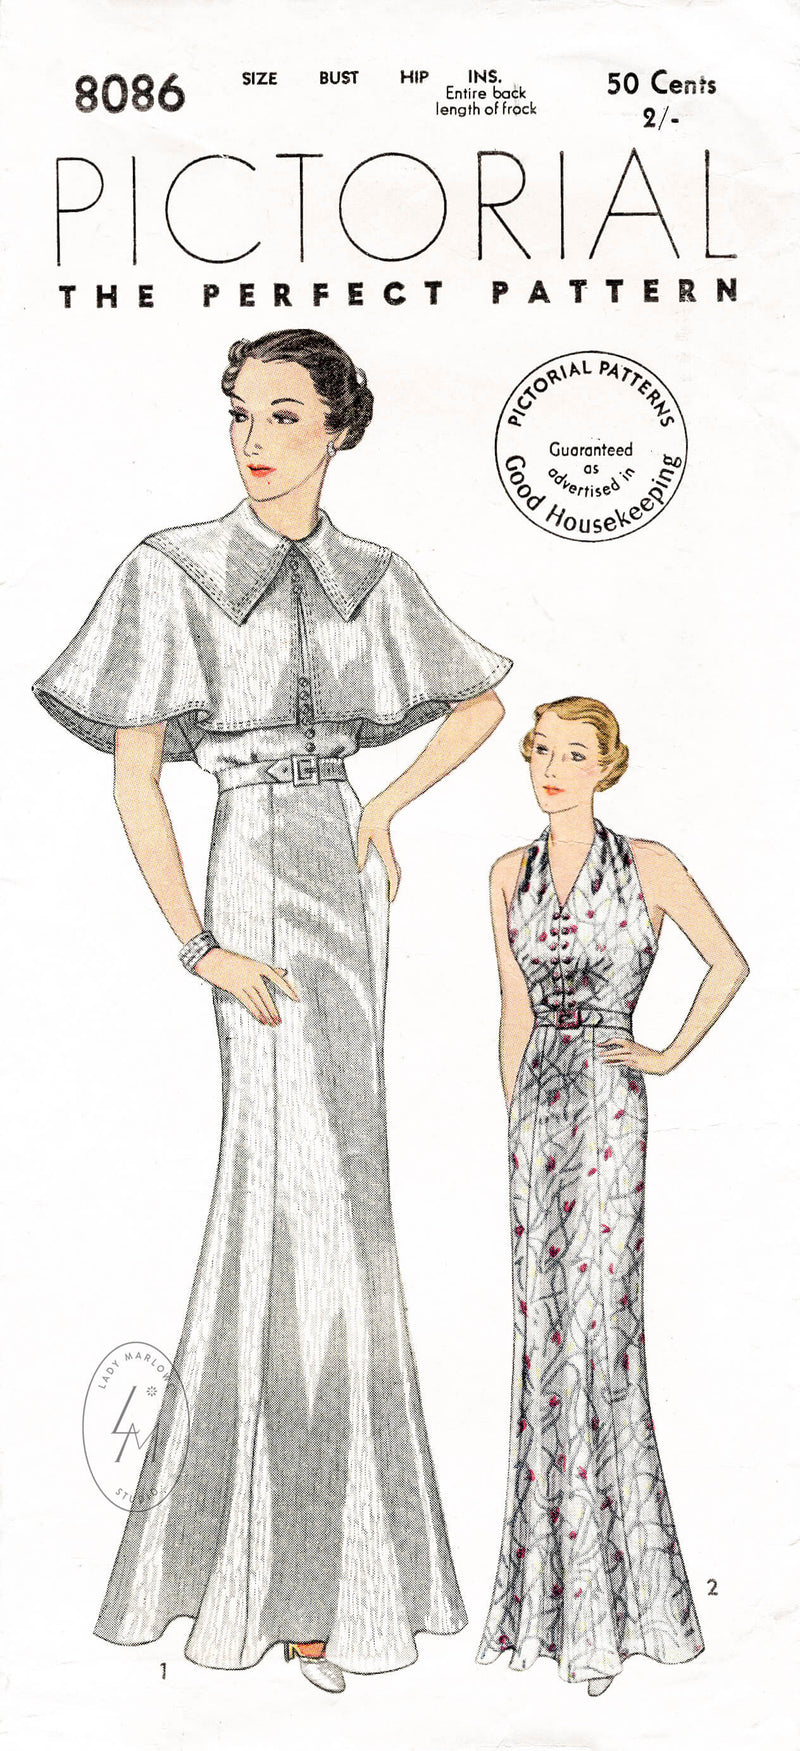 Pictorial Review 8086 1930s evening gown pattern